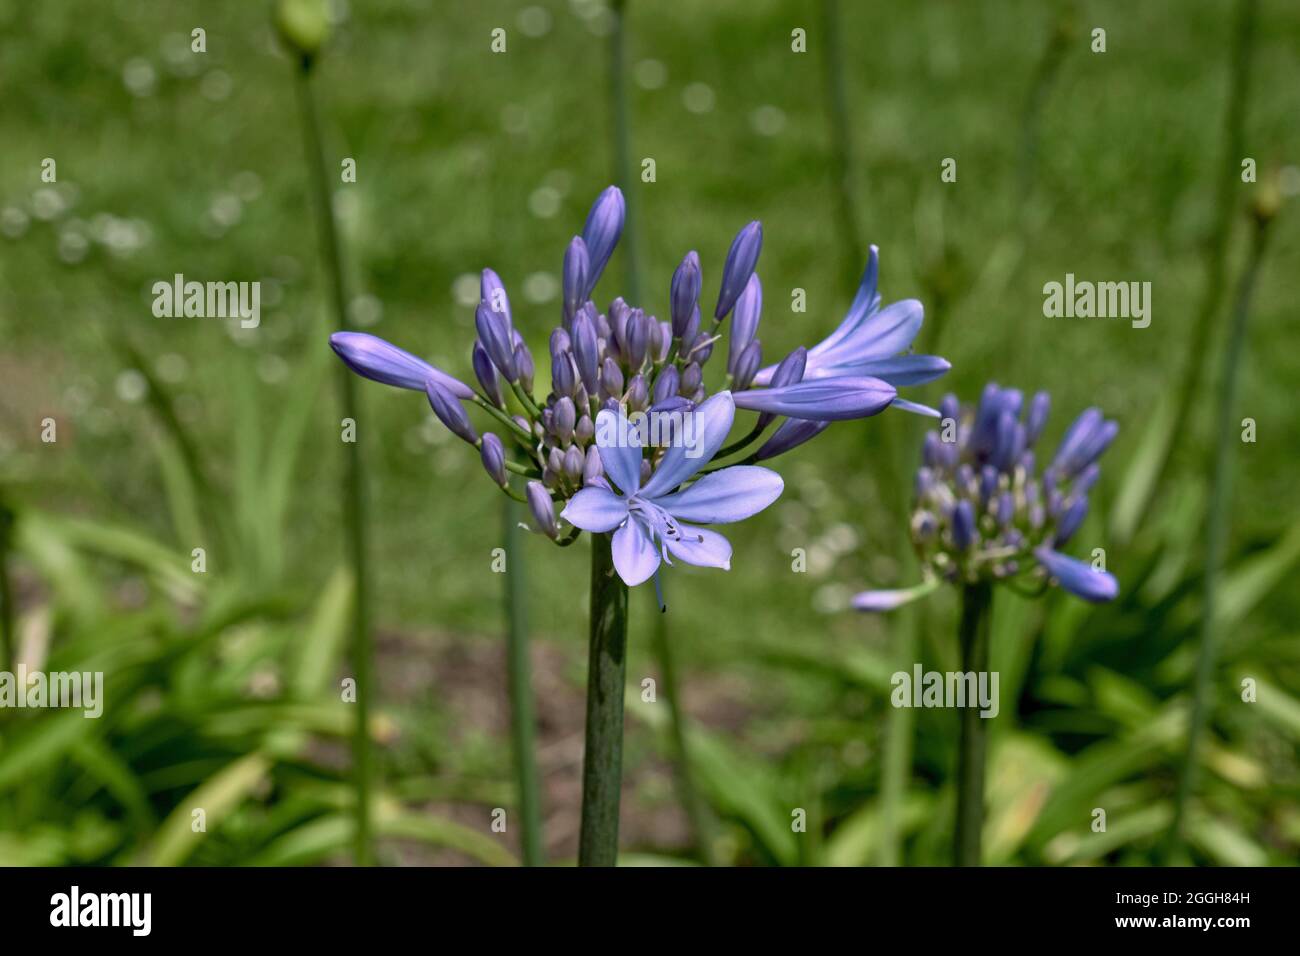 Agapanthus praecox blue lily flowers blooming Stock Photo